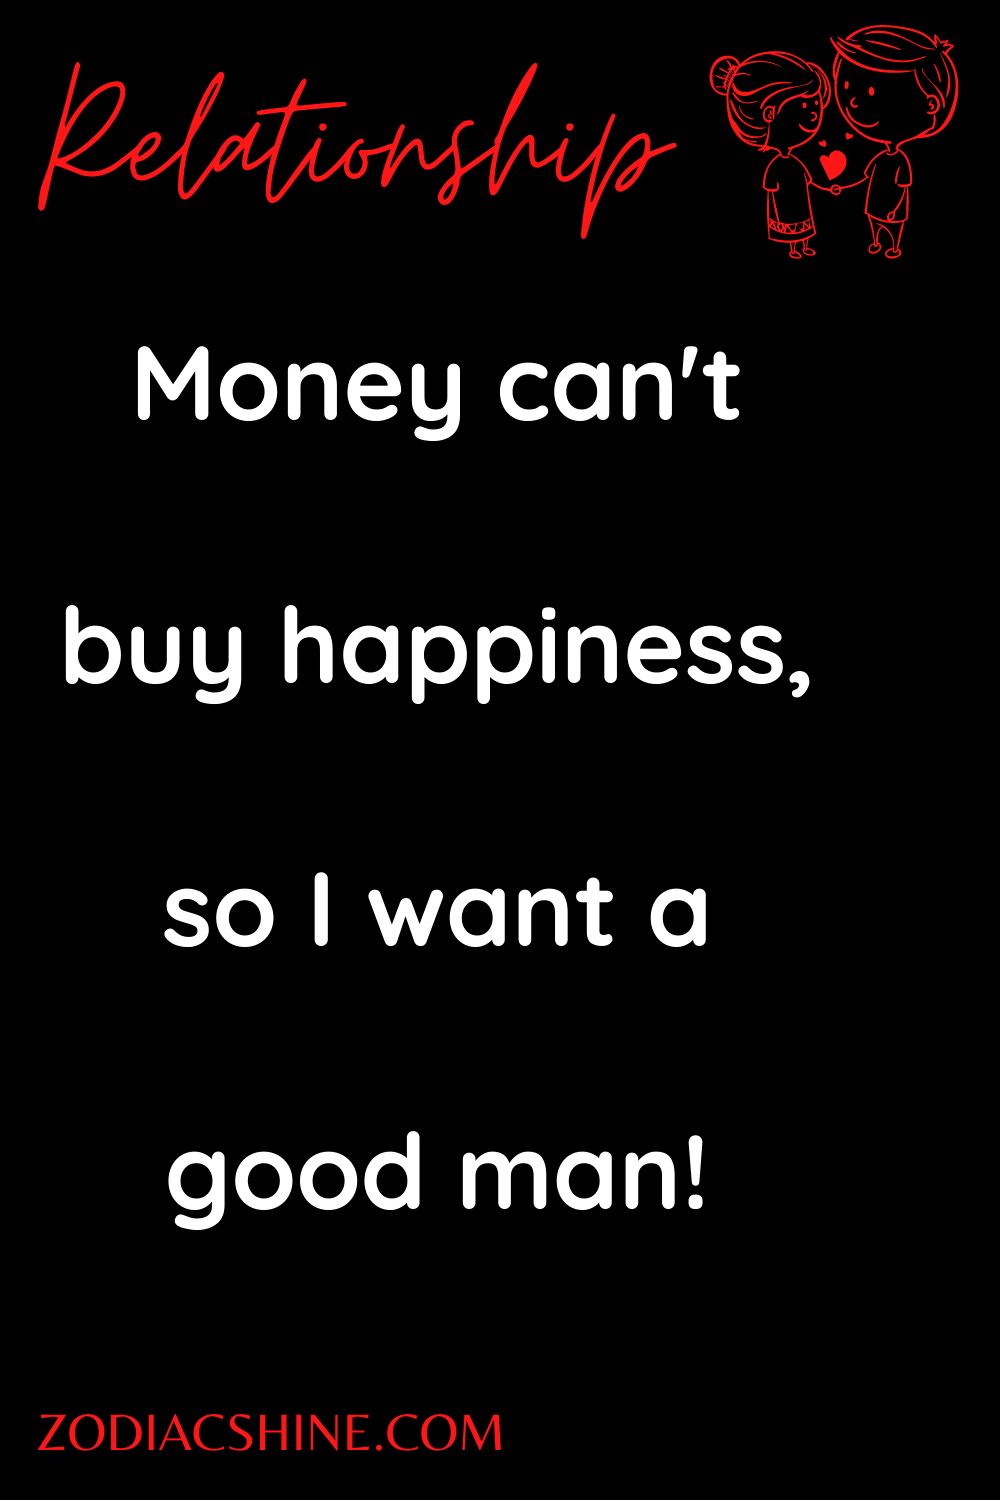 Money can't buy happiness, so I want a good man!